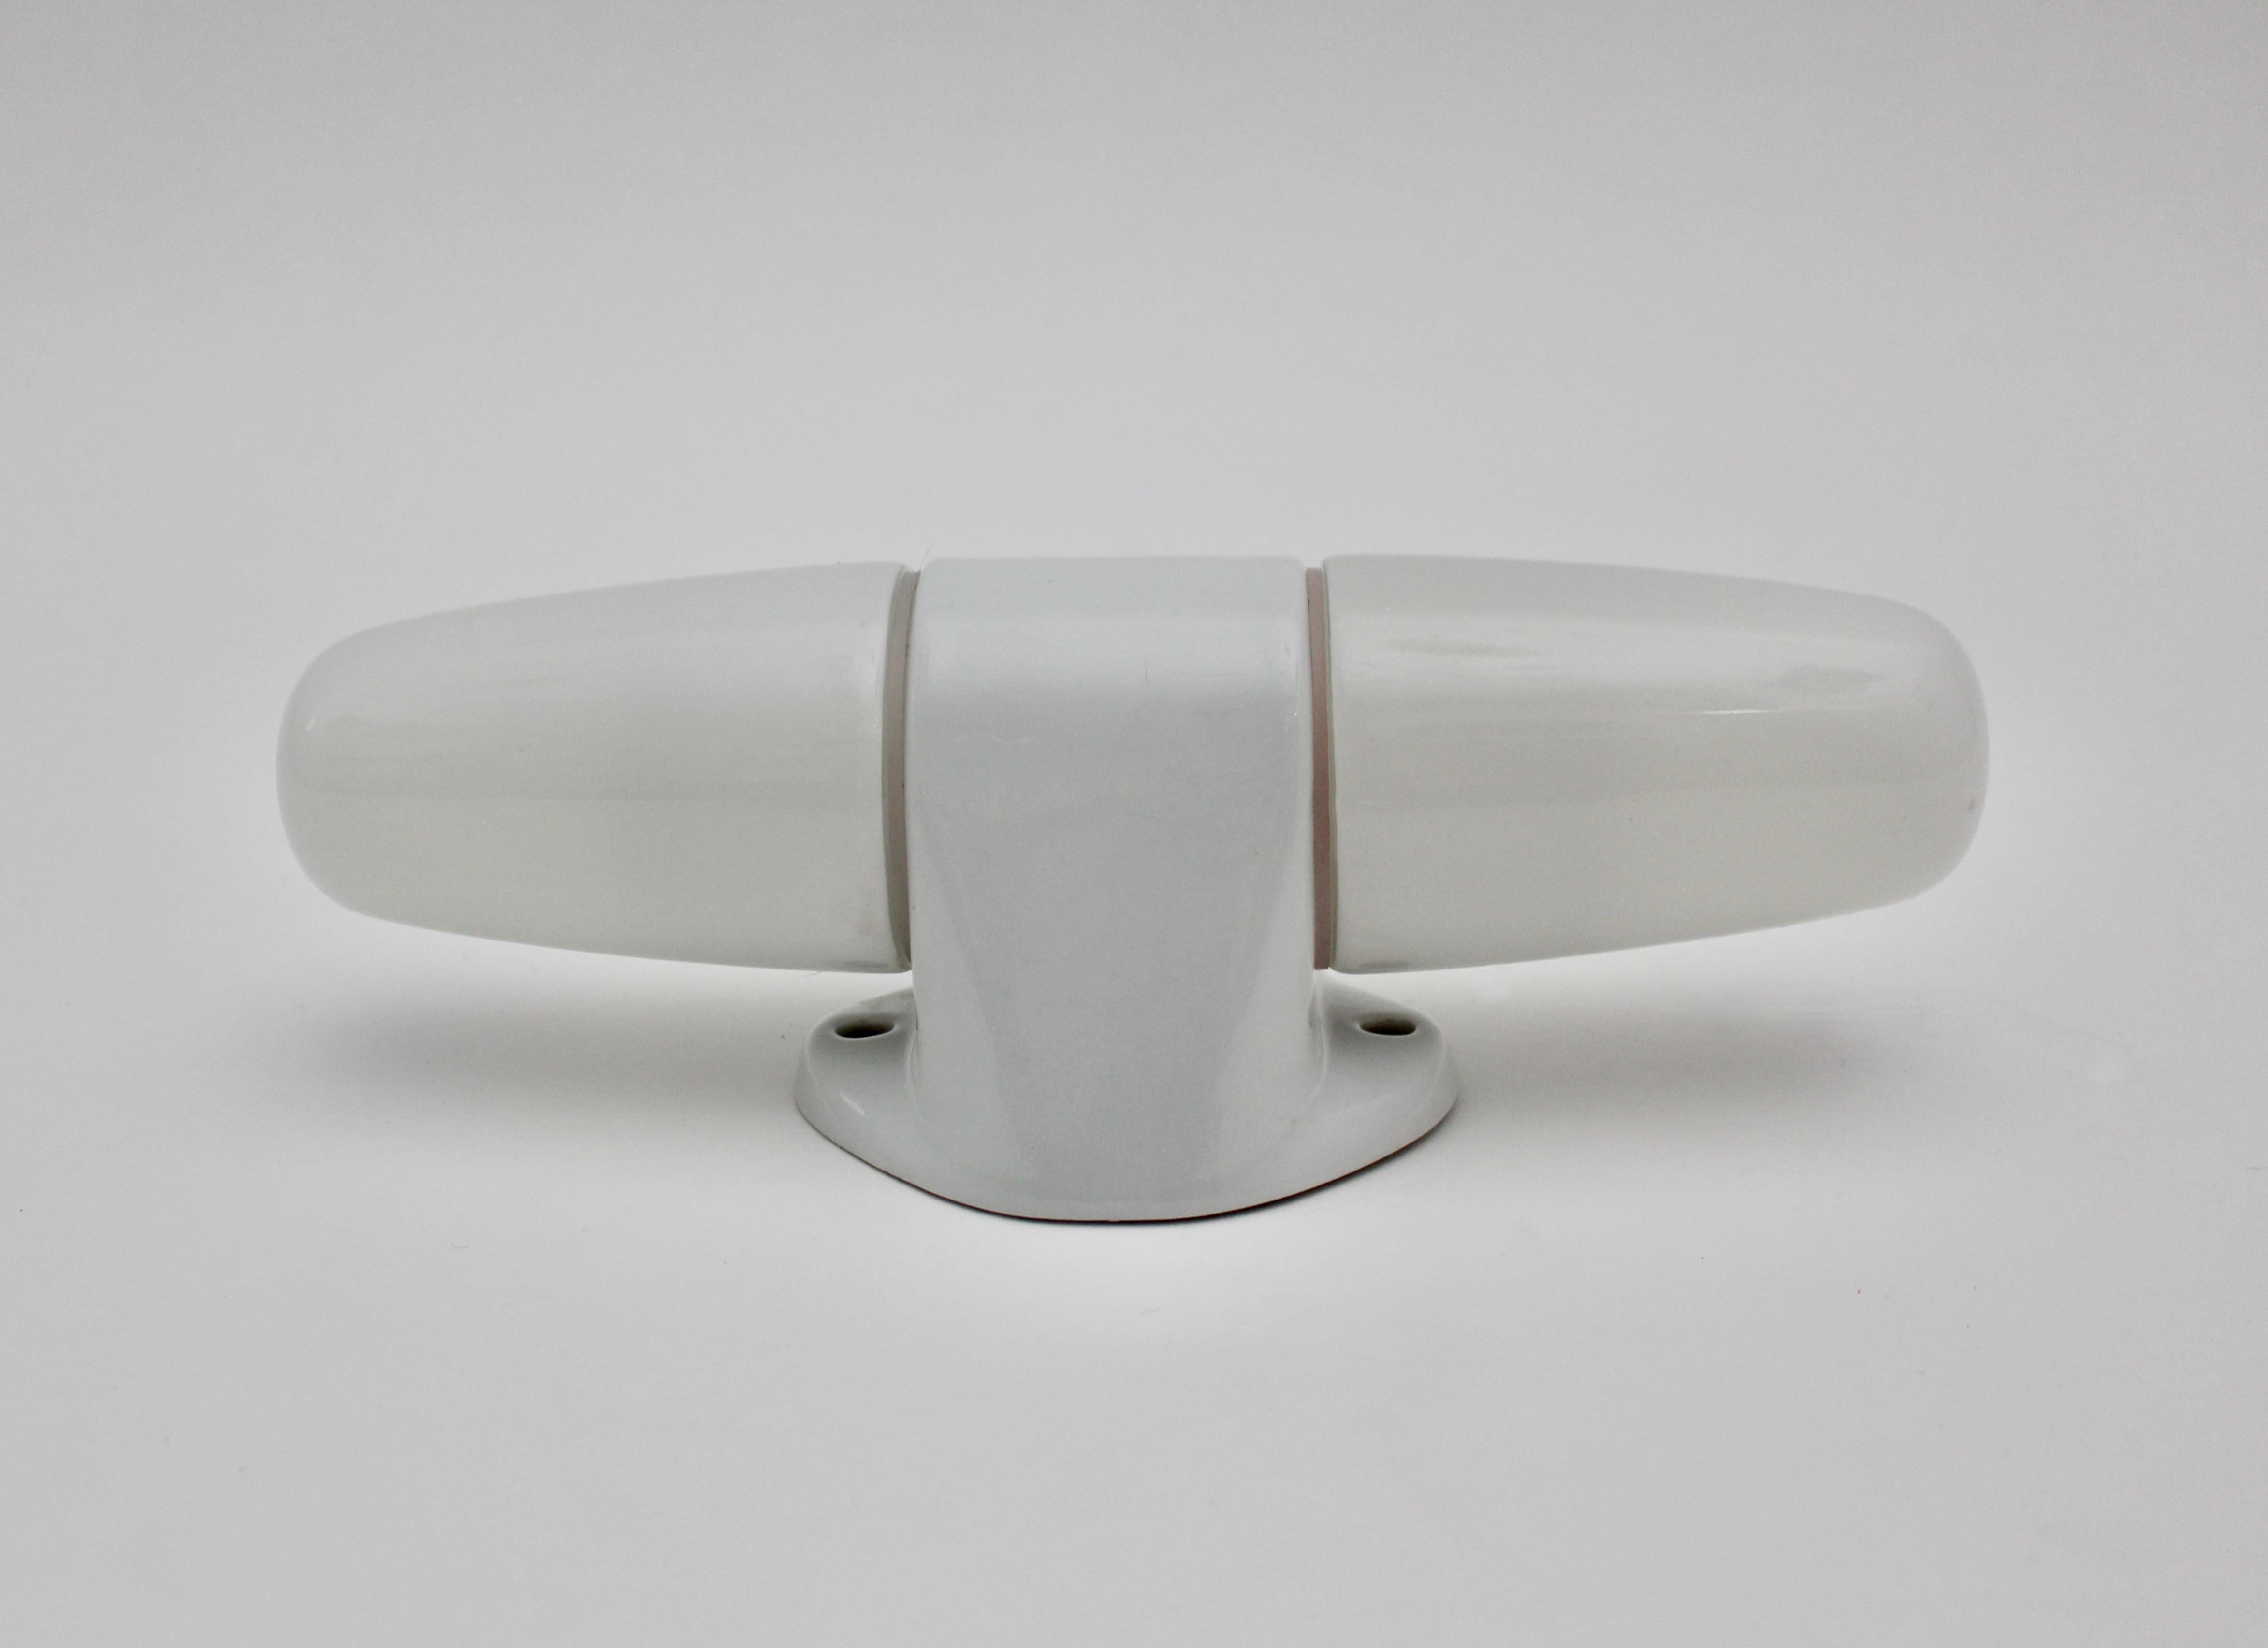 Mid-Century Modern Bauhaus style vintage white glass ceramic sconce or 
wall light by Wilhelm Wagenfeld for Lindner 1950s.
An iconic Bauhaus style vintage sconce by Wilhelm Wagenfeld in sleek and simple white color.
This sconce has two E 14